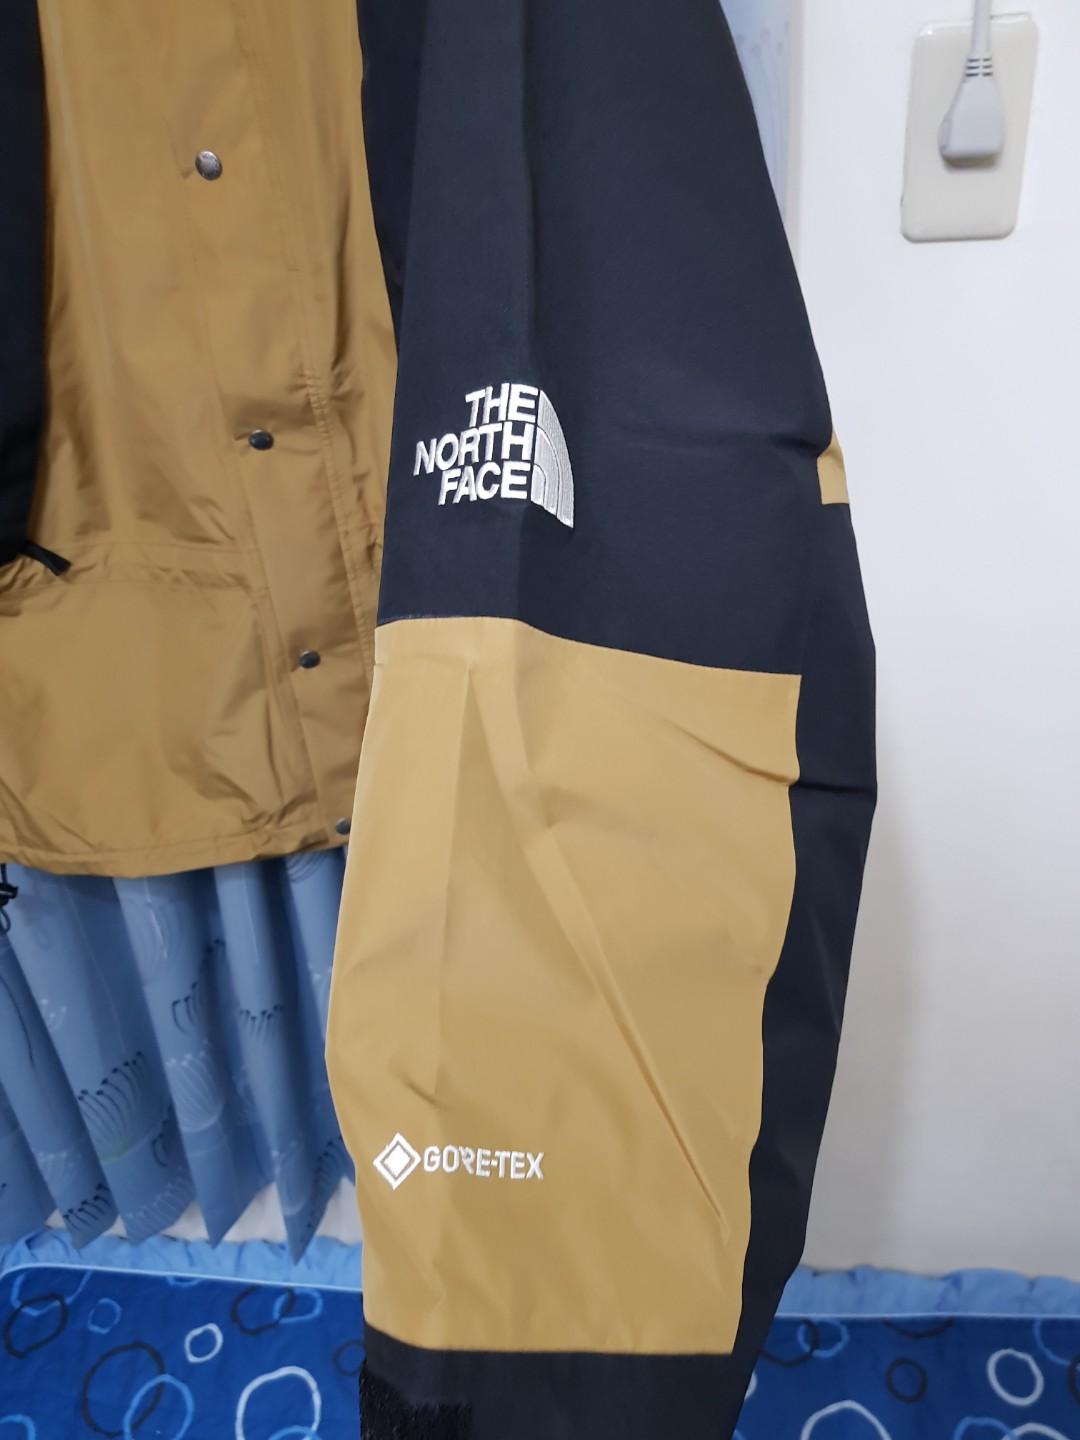 The North Face Gore-Tex 1994 Mountain Light Jacket 類似1990, 他的